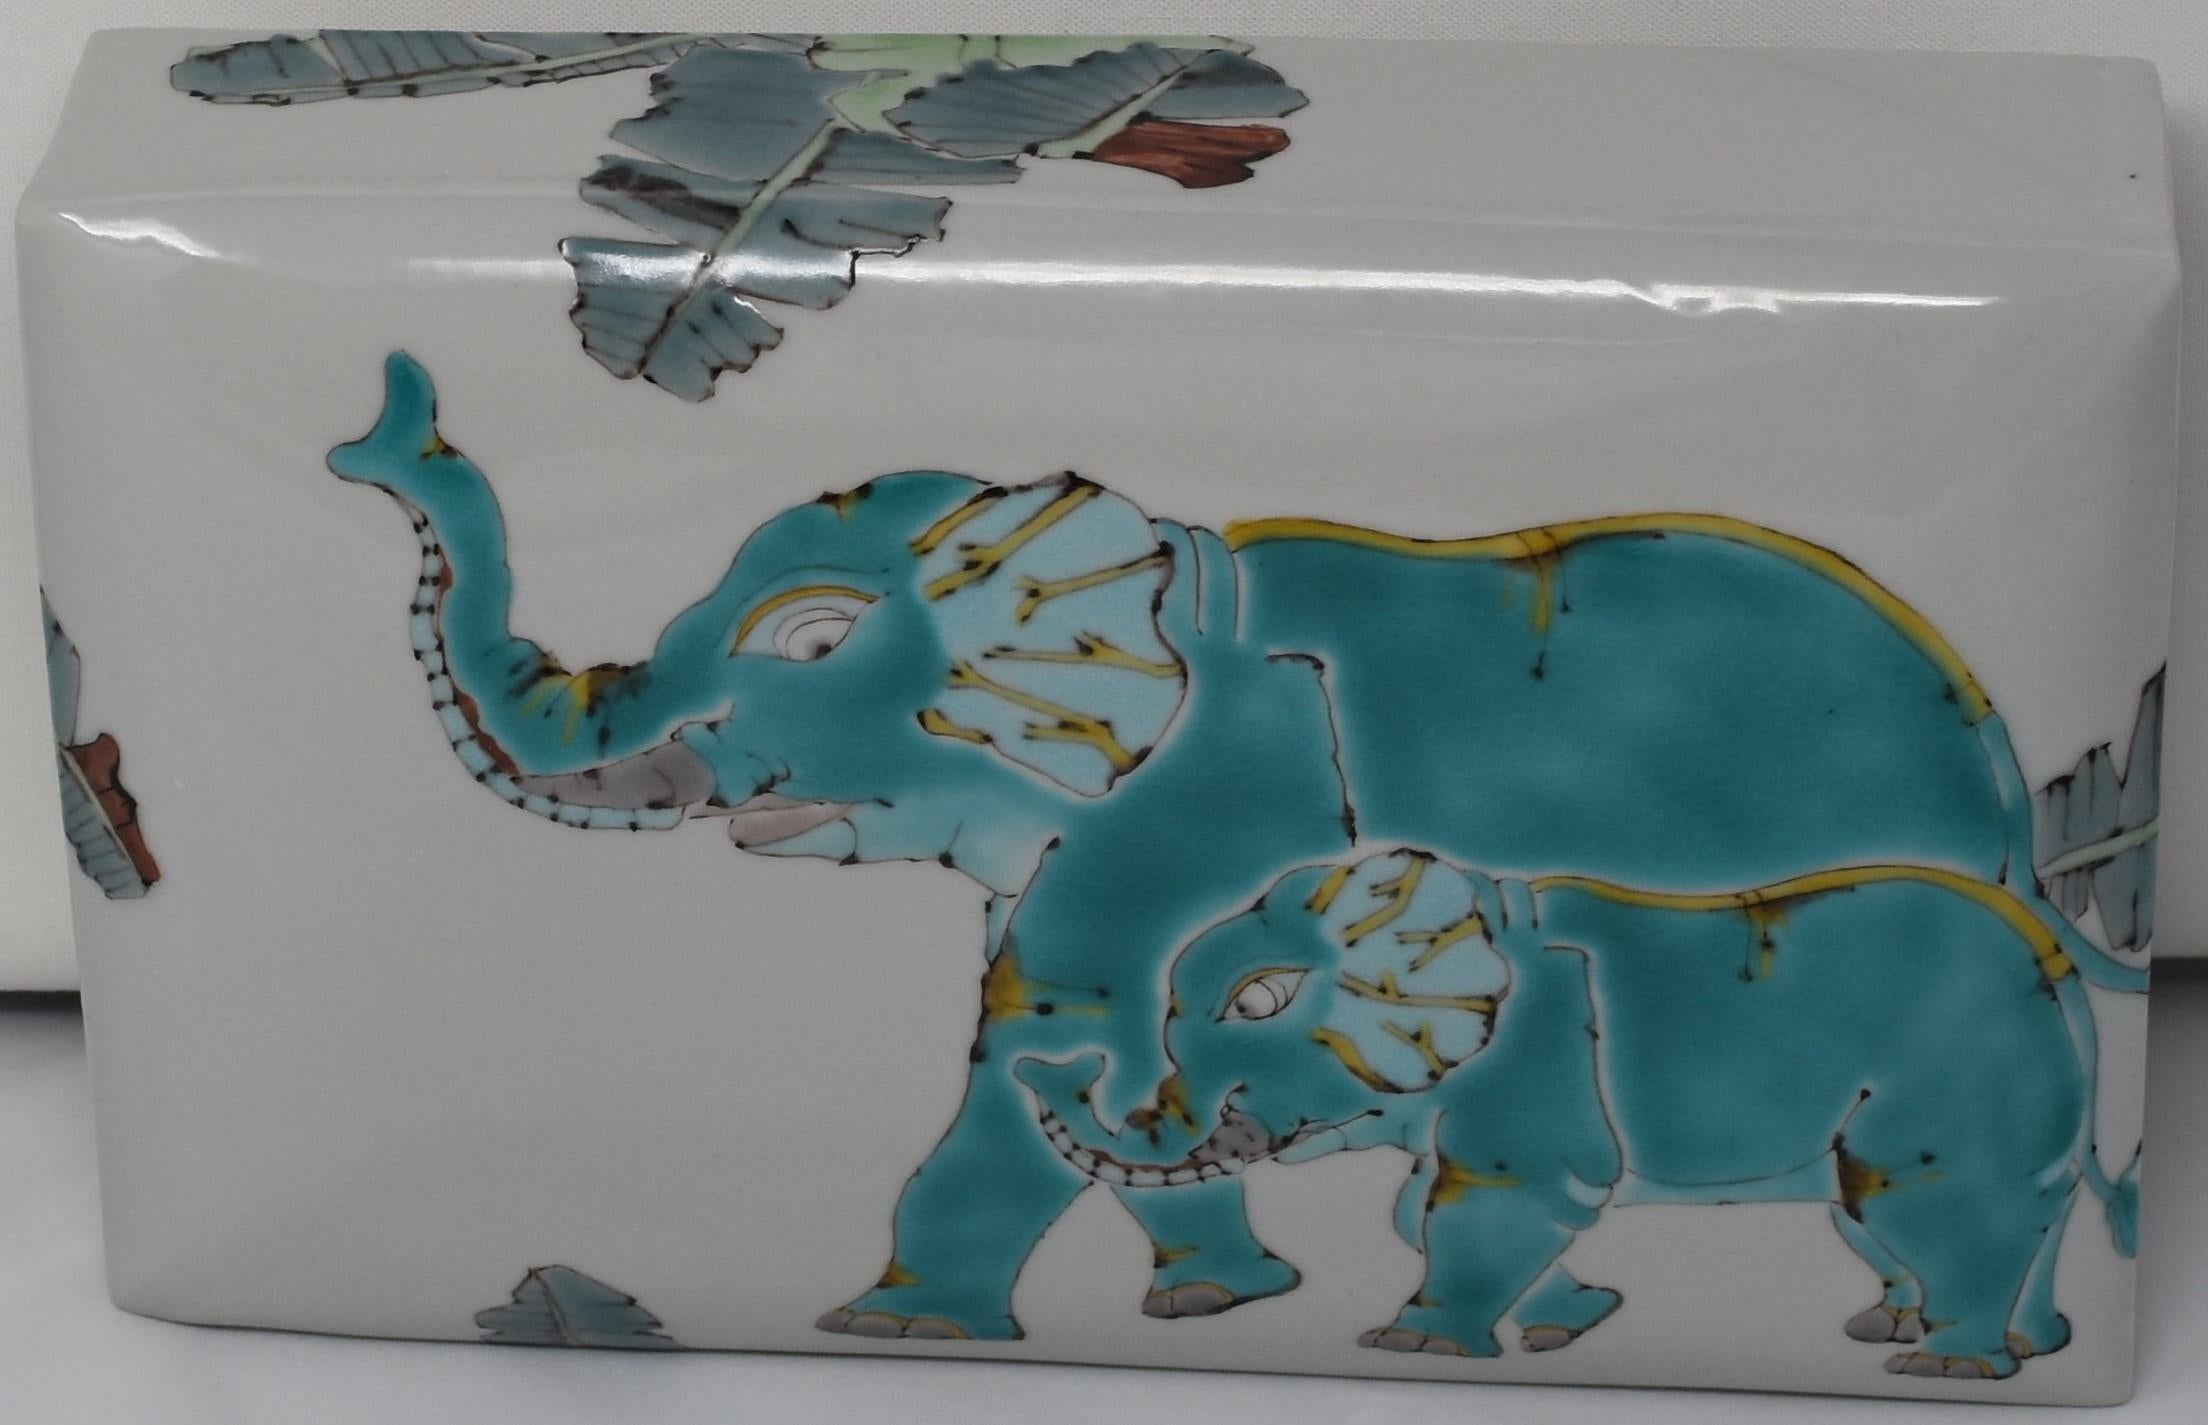 Exquisite unique contemporary Japanese signed decorative ceramic box, hand painted in green with a unique interpretation of elephants. The highly acclaimed artist has drawn on various animals featured in Buddhist scriptures and religious practice to